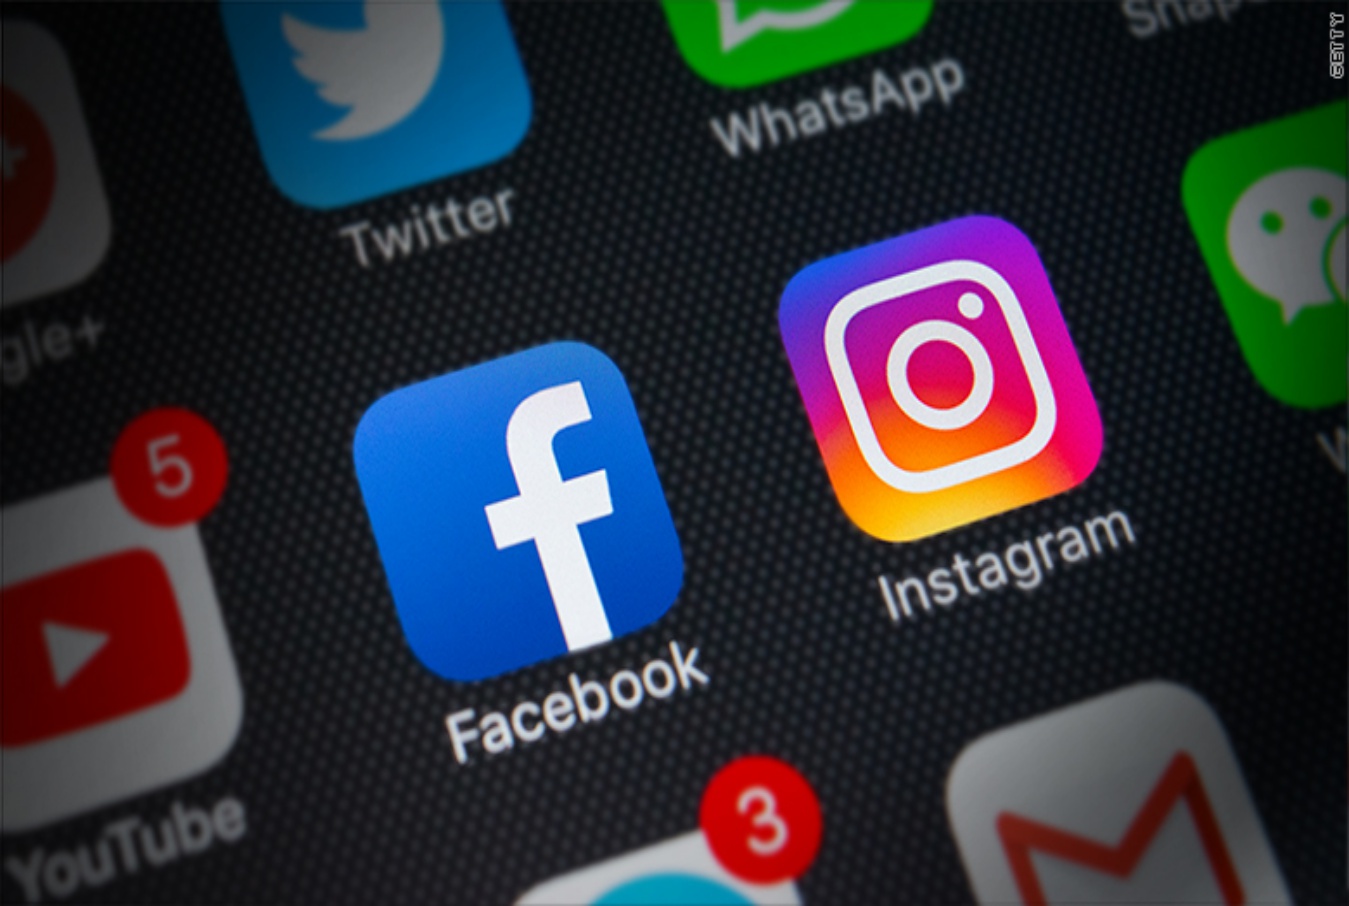 Is your Facebook and Instagram down? Well, you are not alone